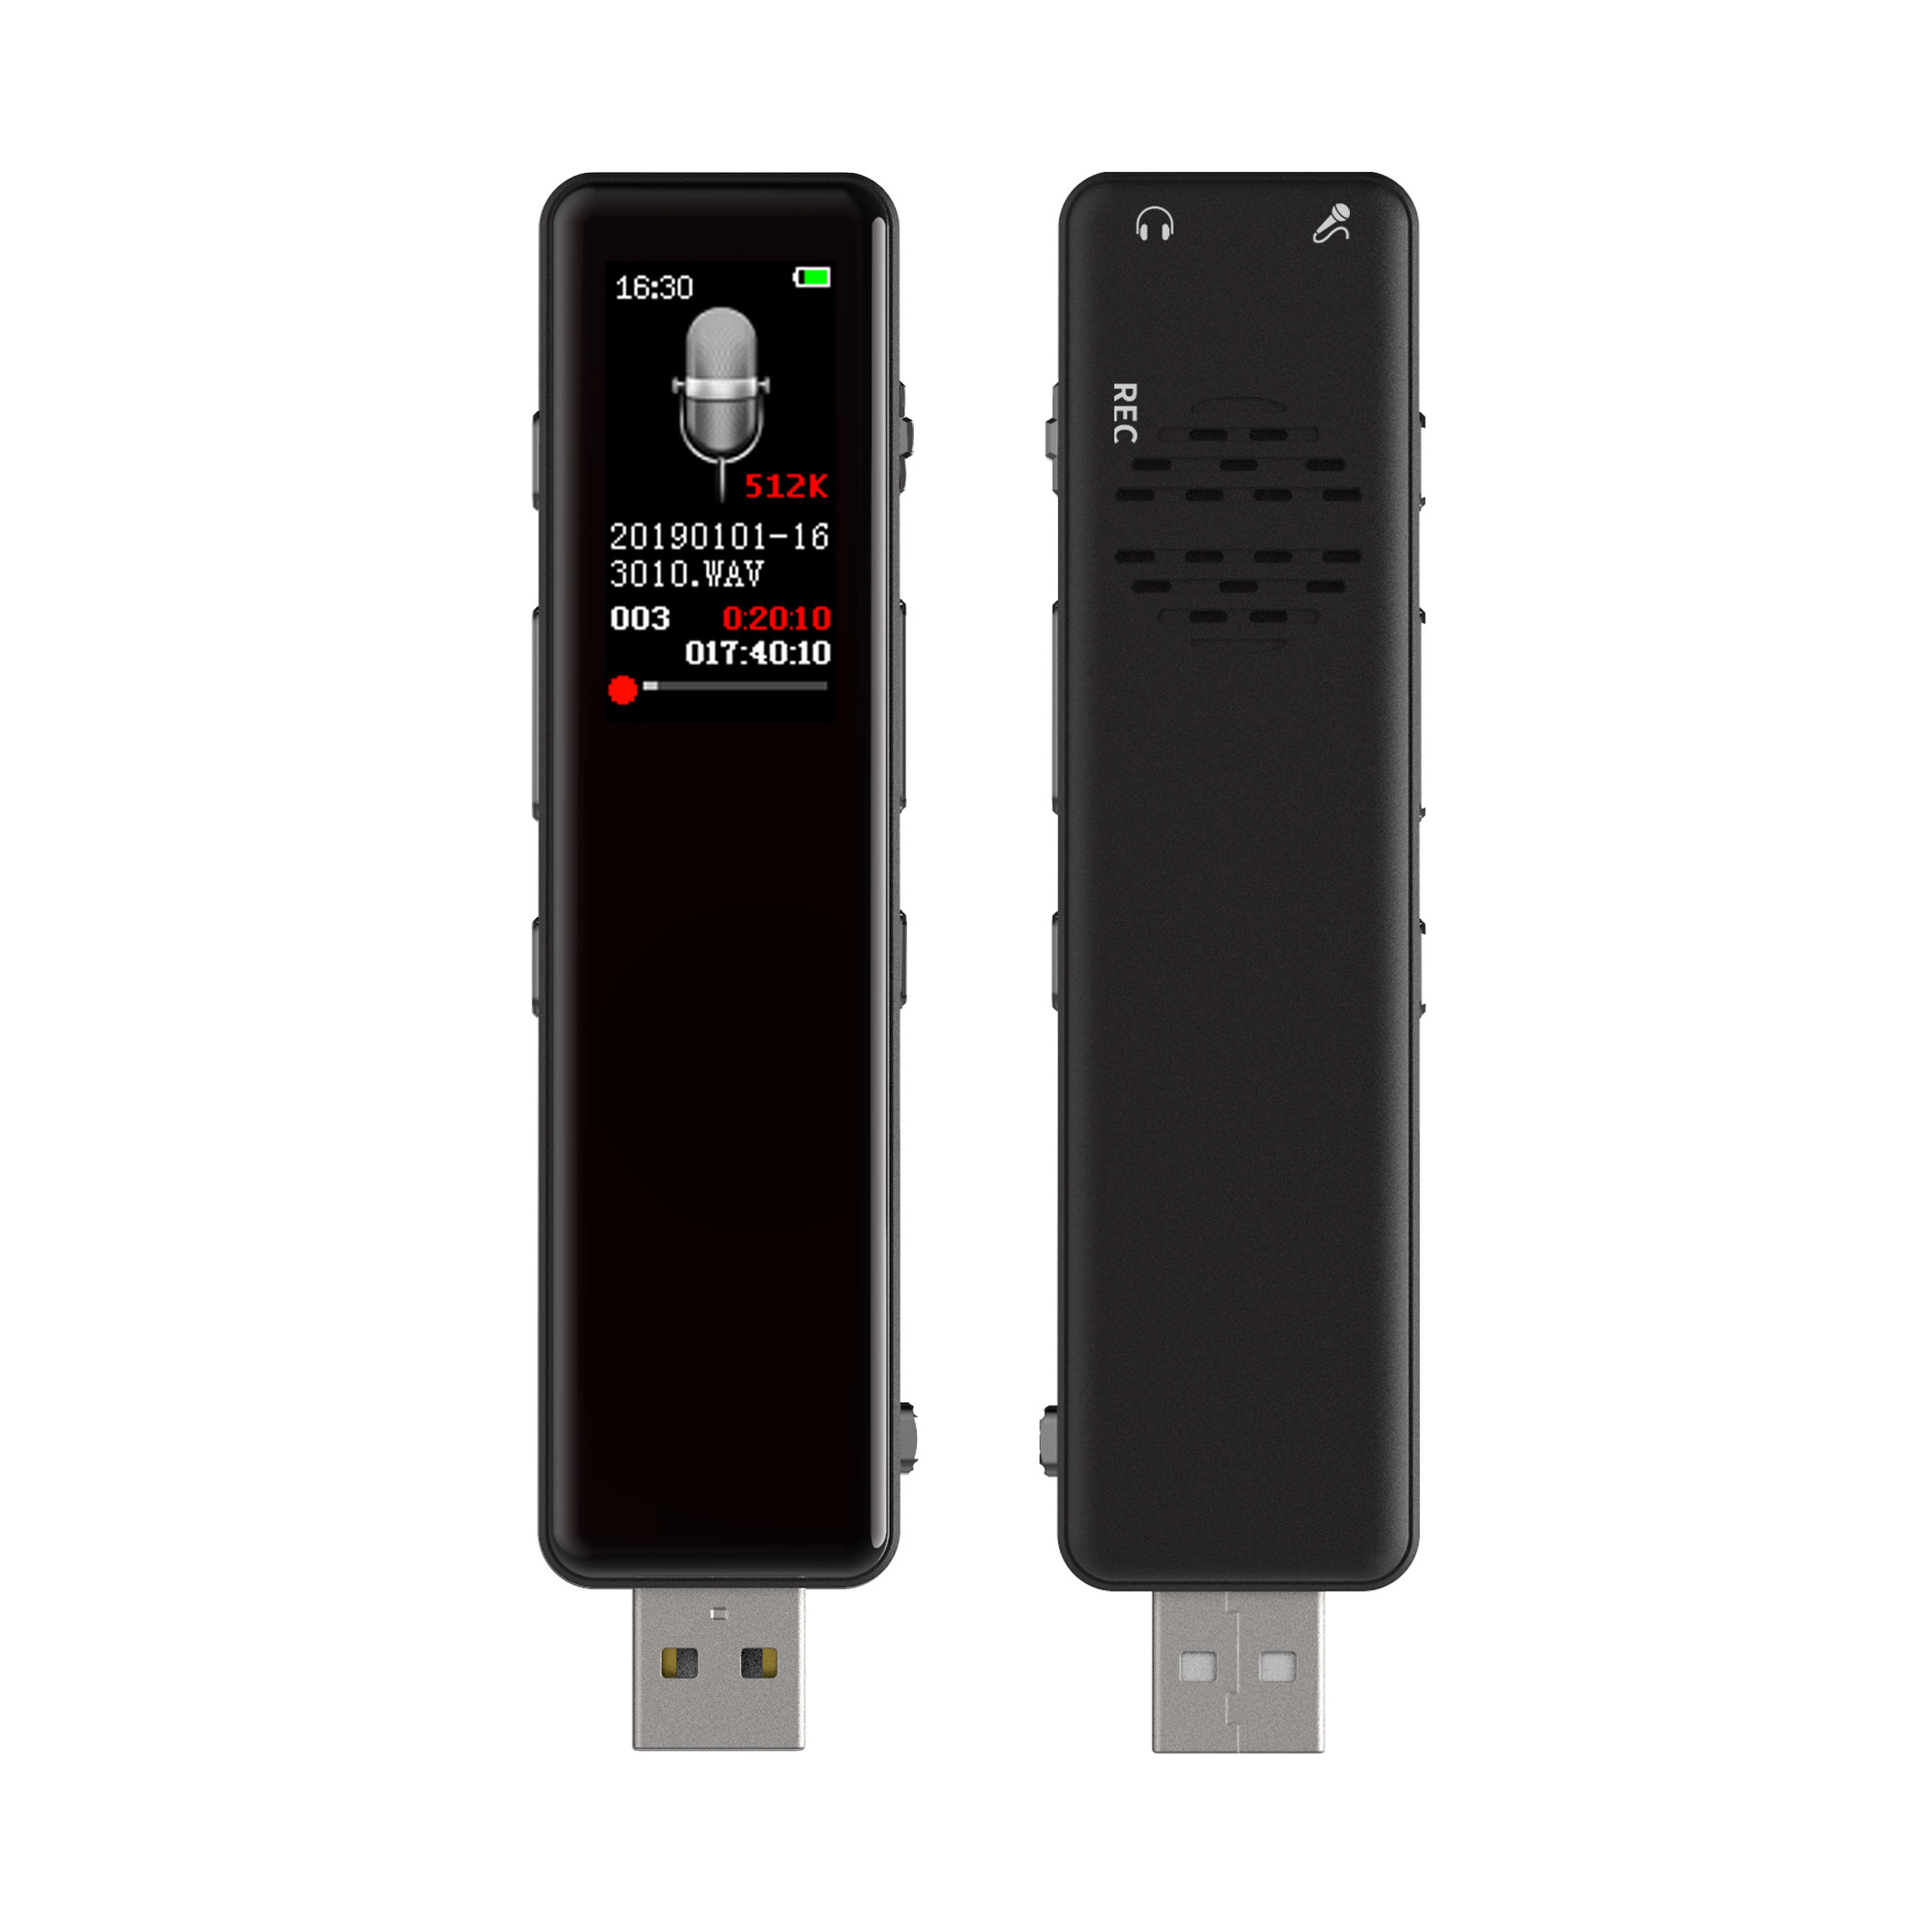 New professional digital recorder USB retractable with music playback